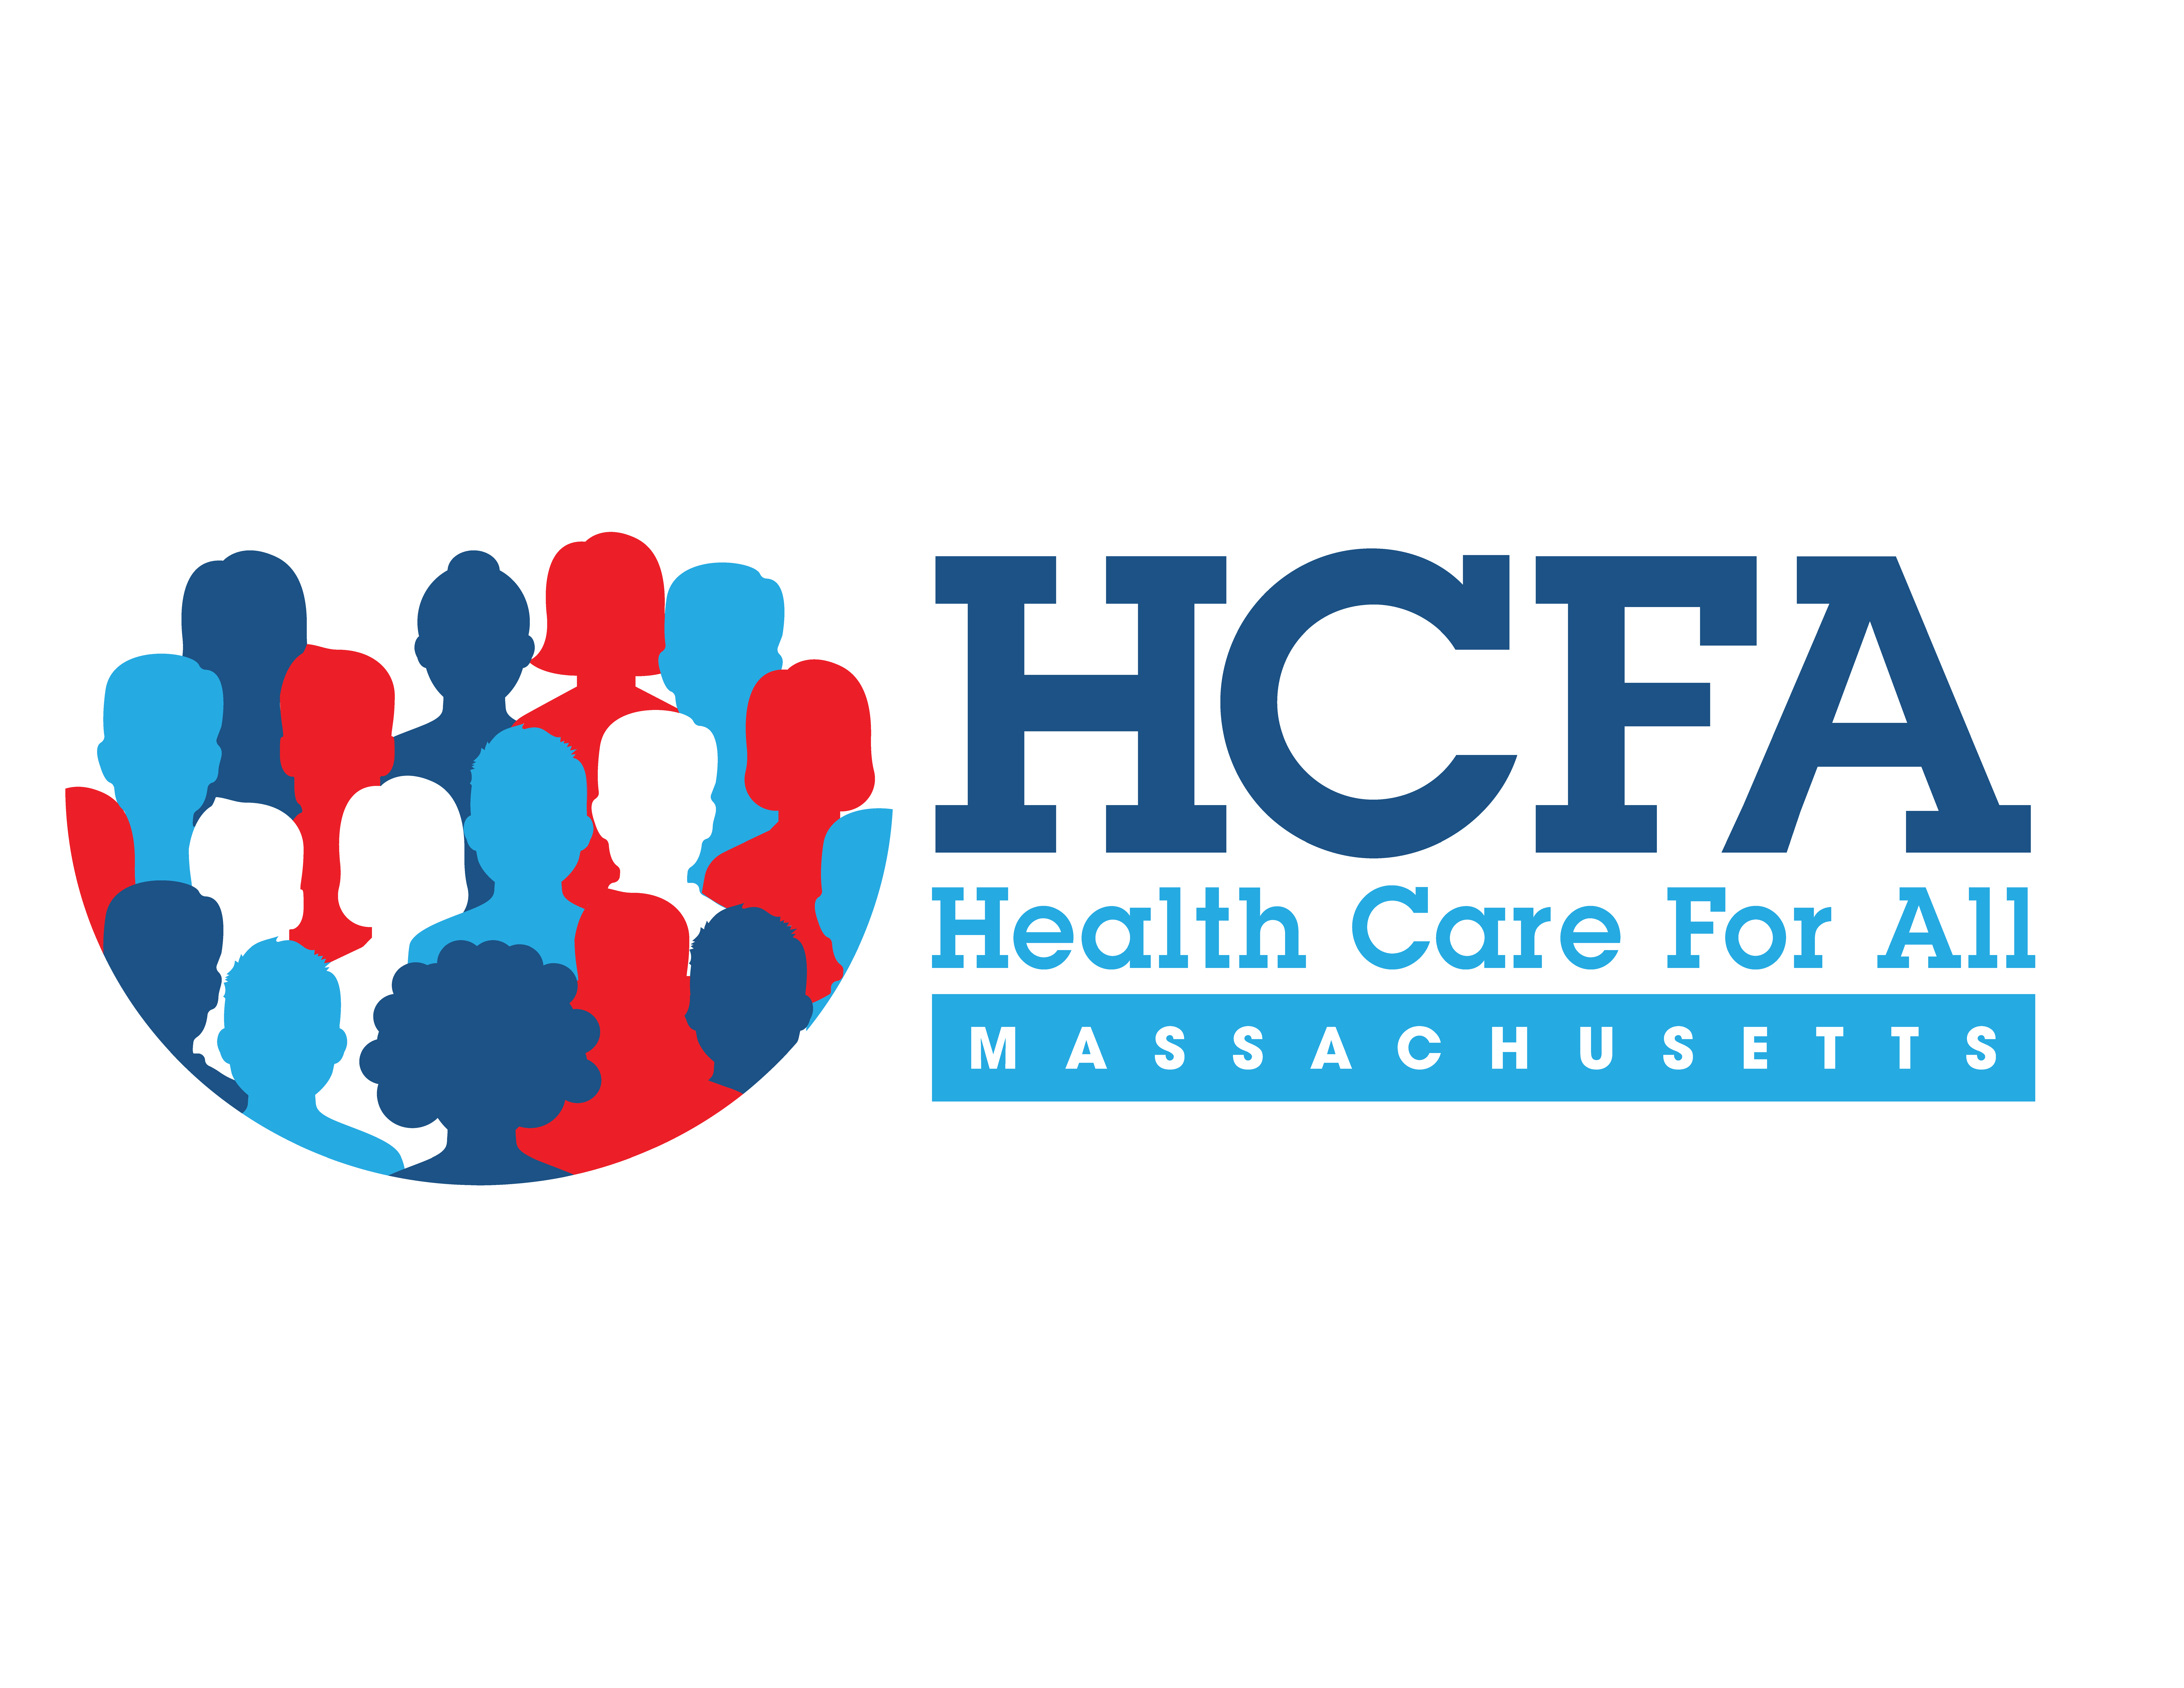 Connector Tying Copay Relief To Health Conditions | State House News Service | March 10, 2022